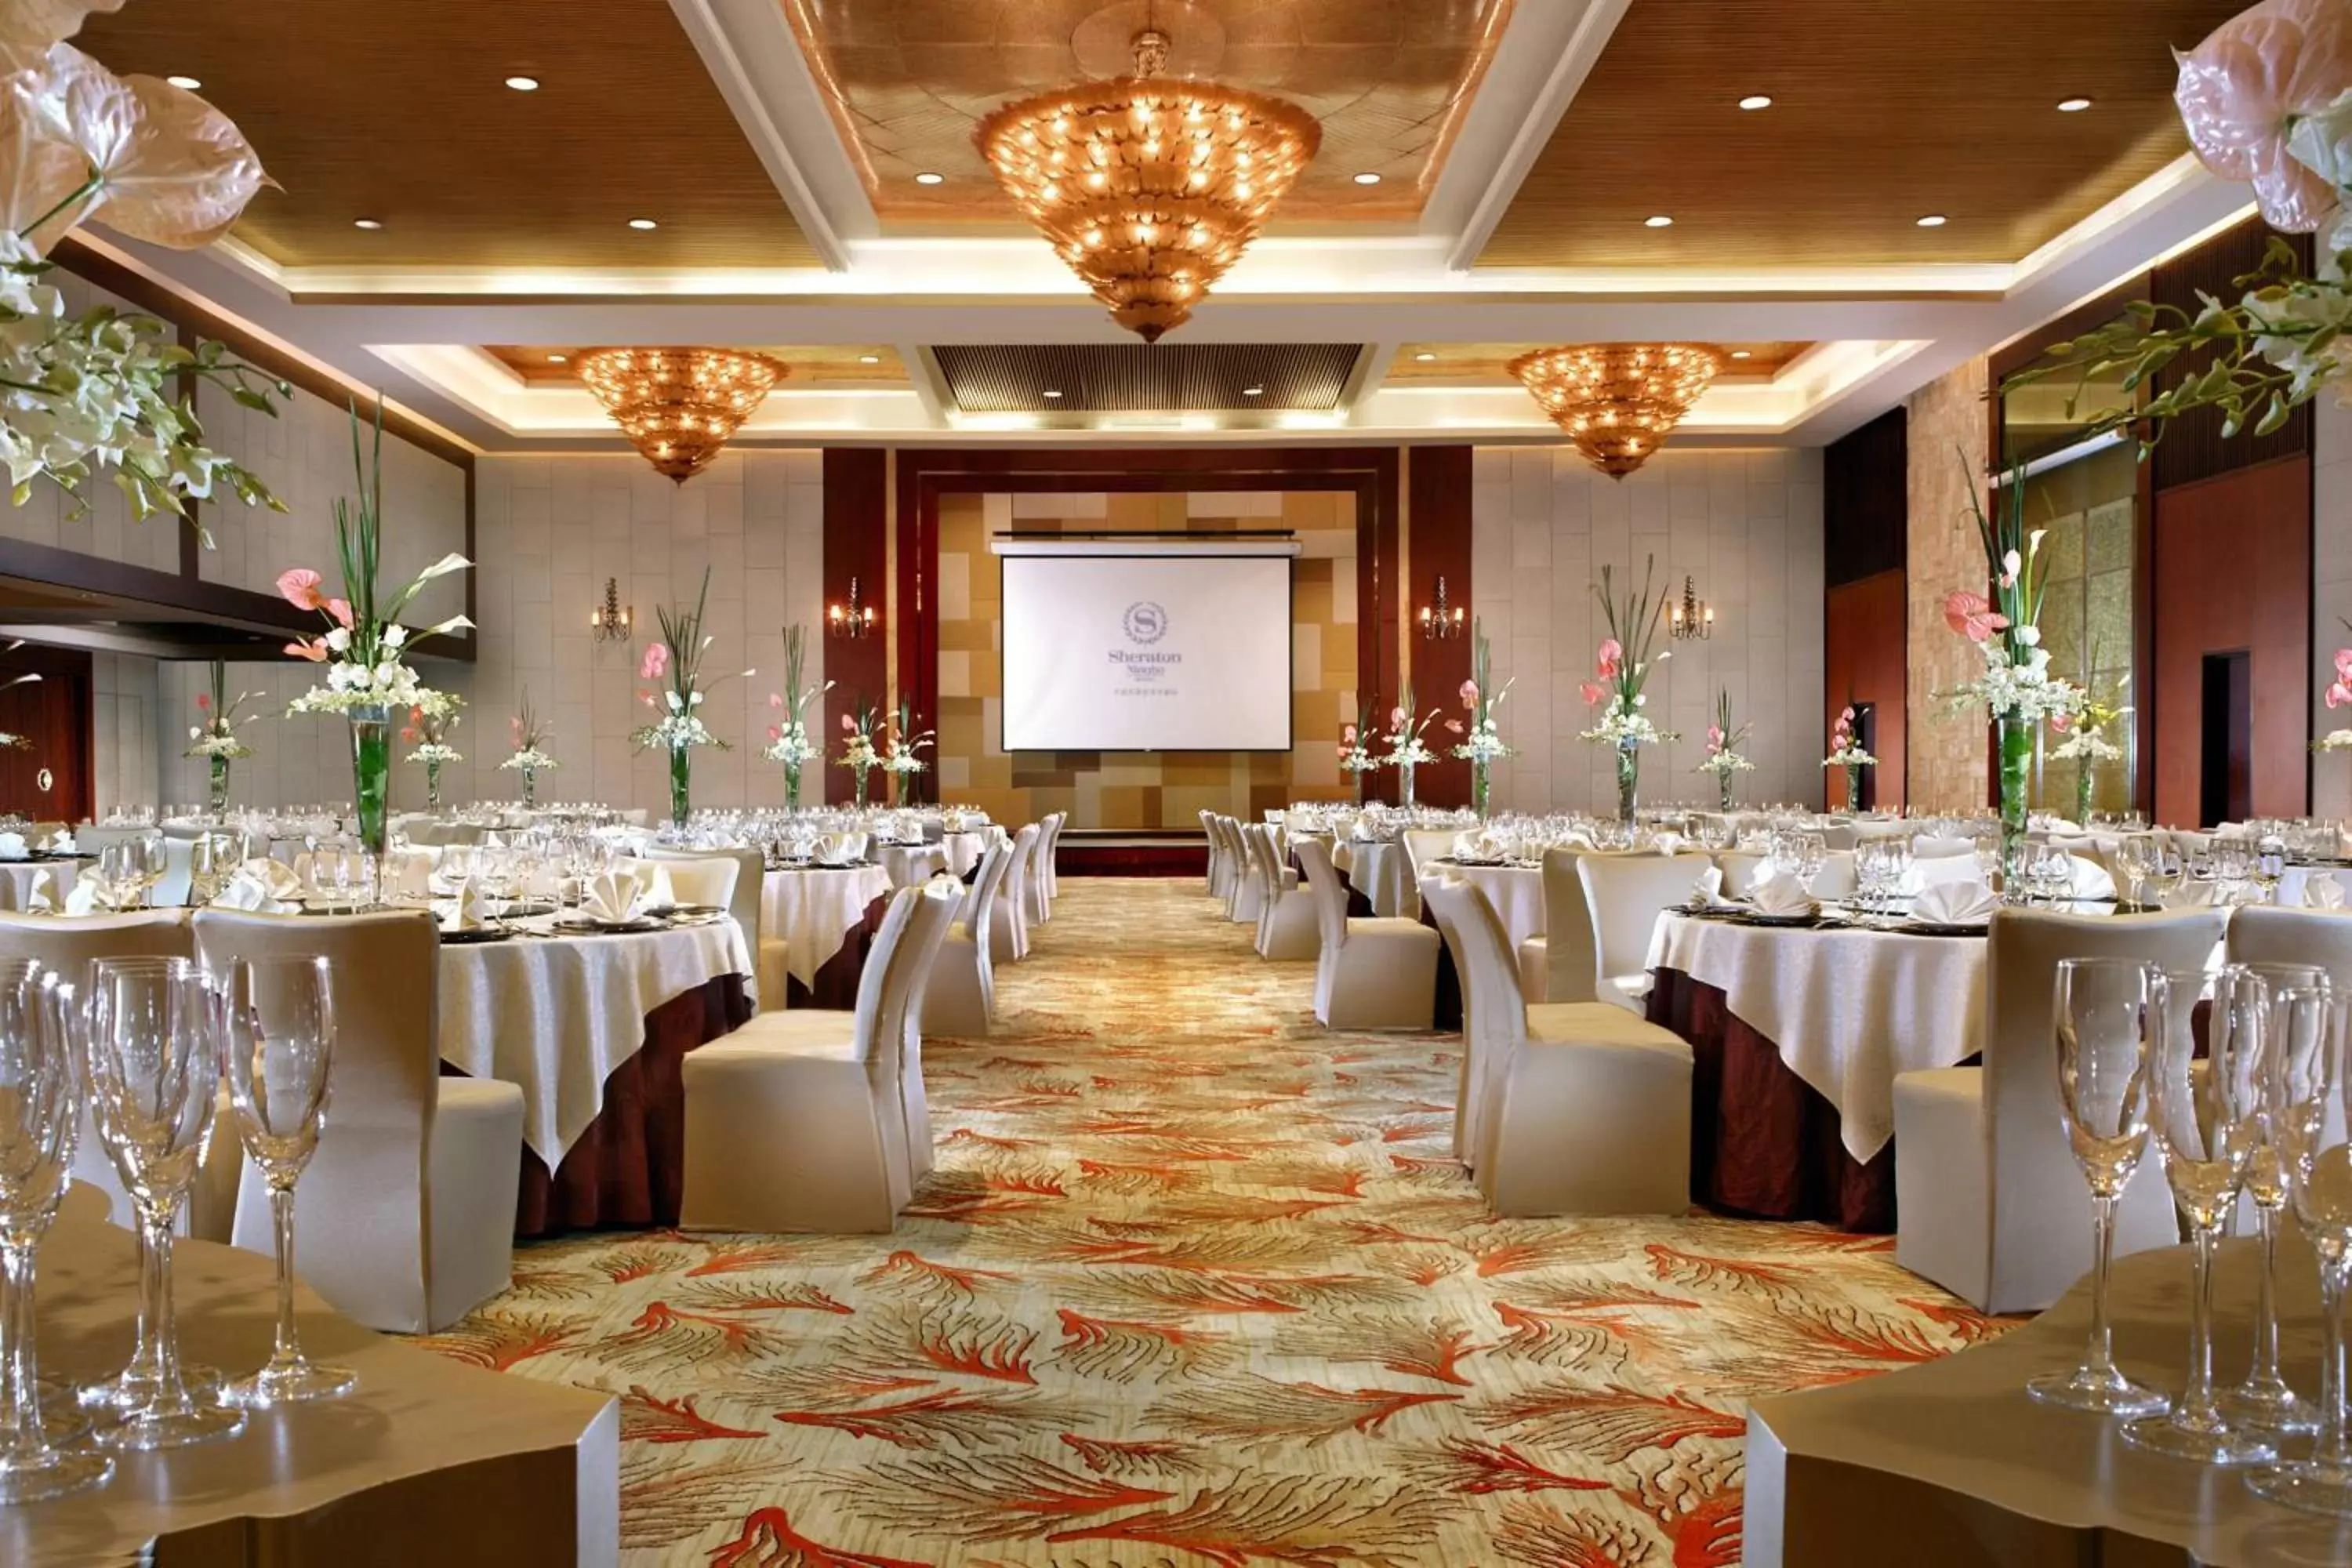 Meeting/conference room, Banquet Facilities in Sheraton Ningbo Hotel - Tianyi Square